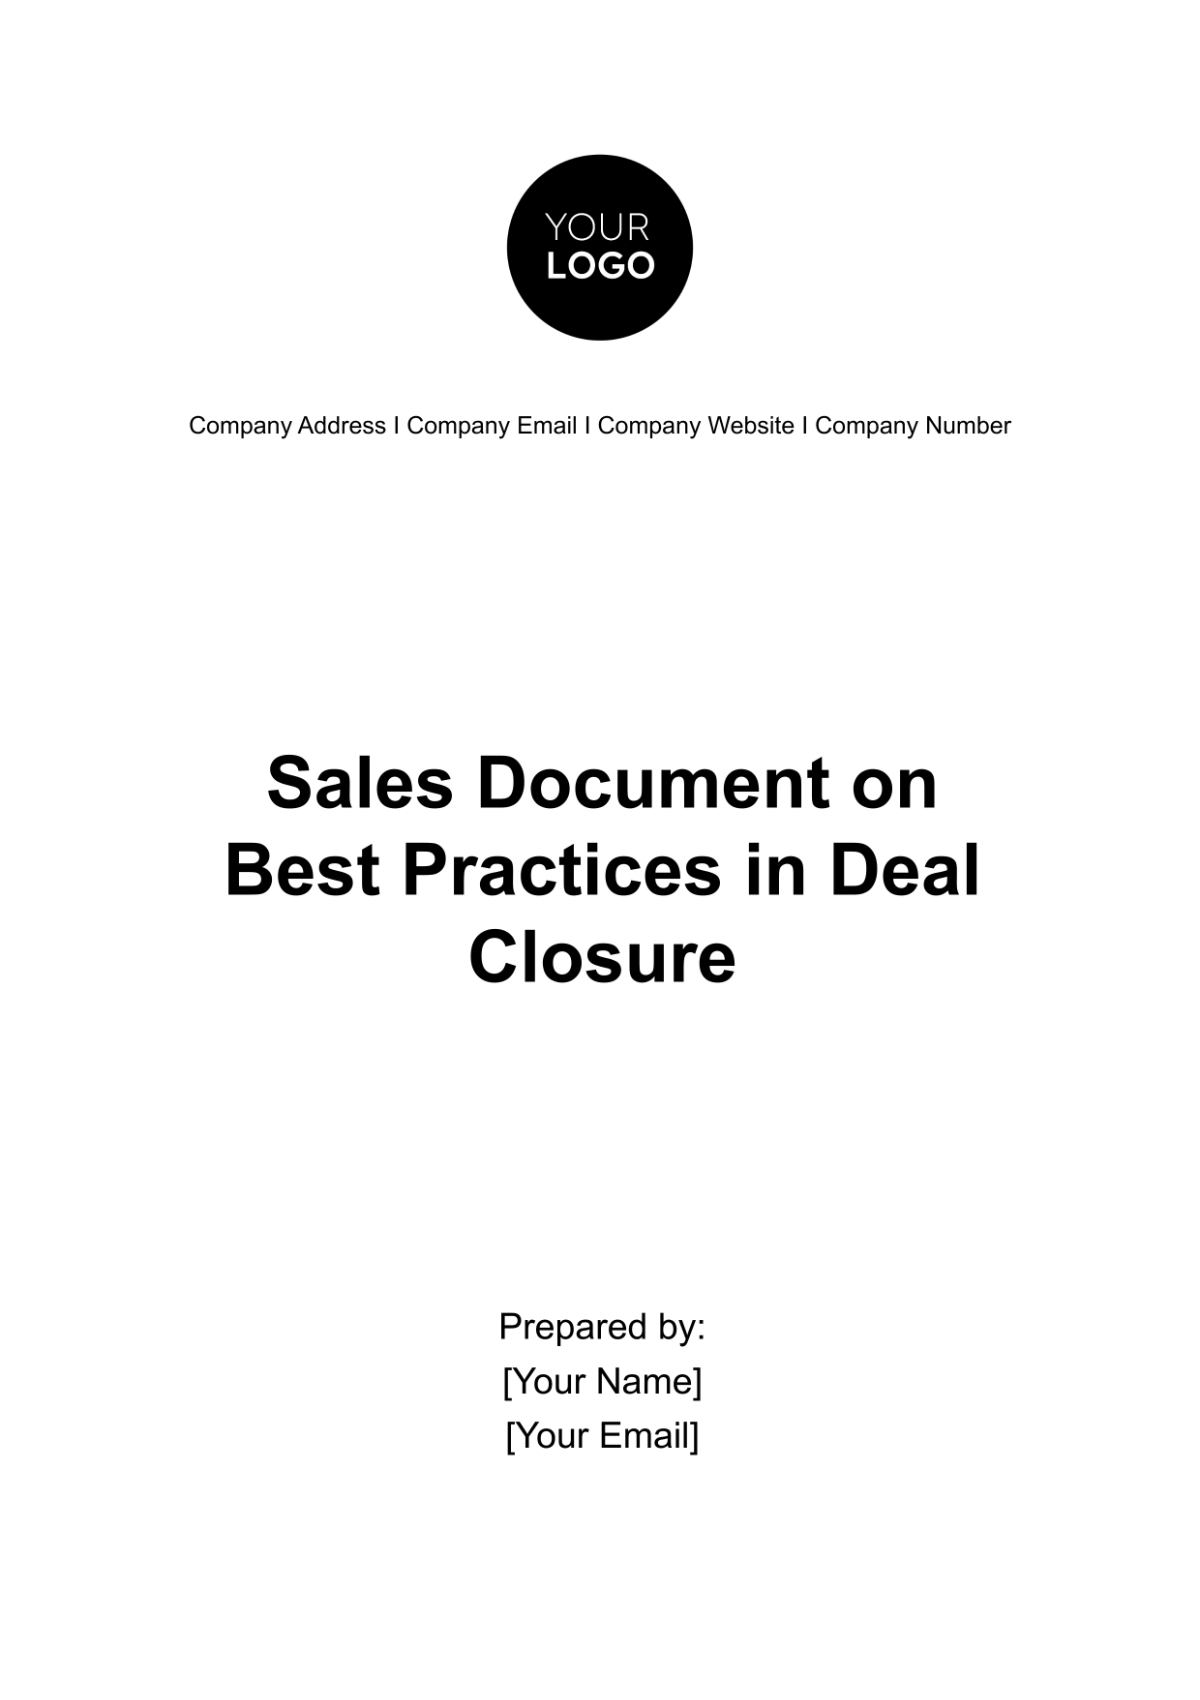 Sales Document on Best Practices in Deal Closure Template